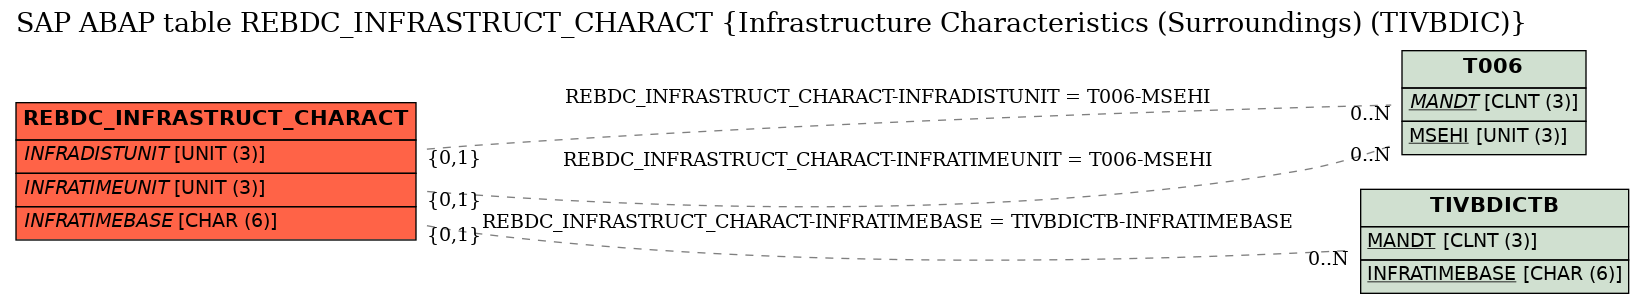 E-R Diagram for table REBDC_INFRASTRUCT_CHARACT (Infrastructure Characteristics (Surroundings) (TIVBDIC))